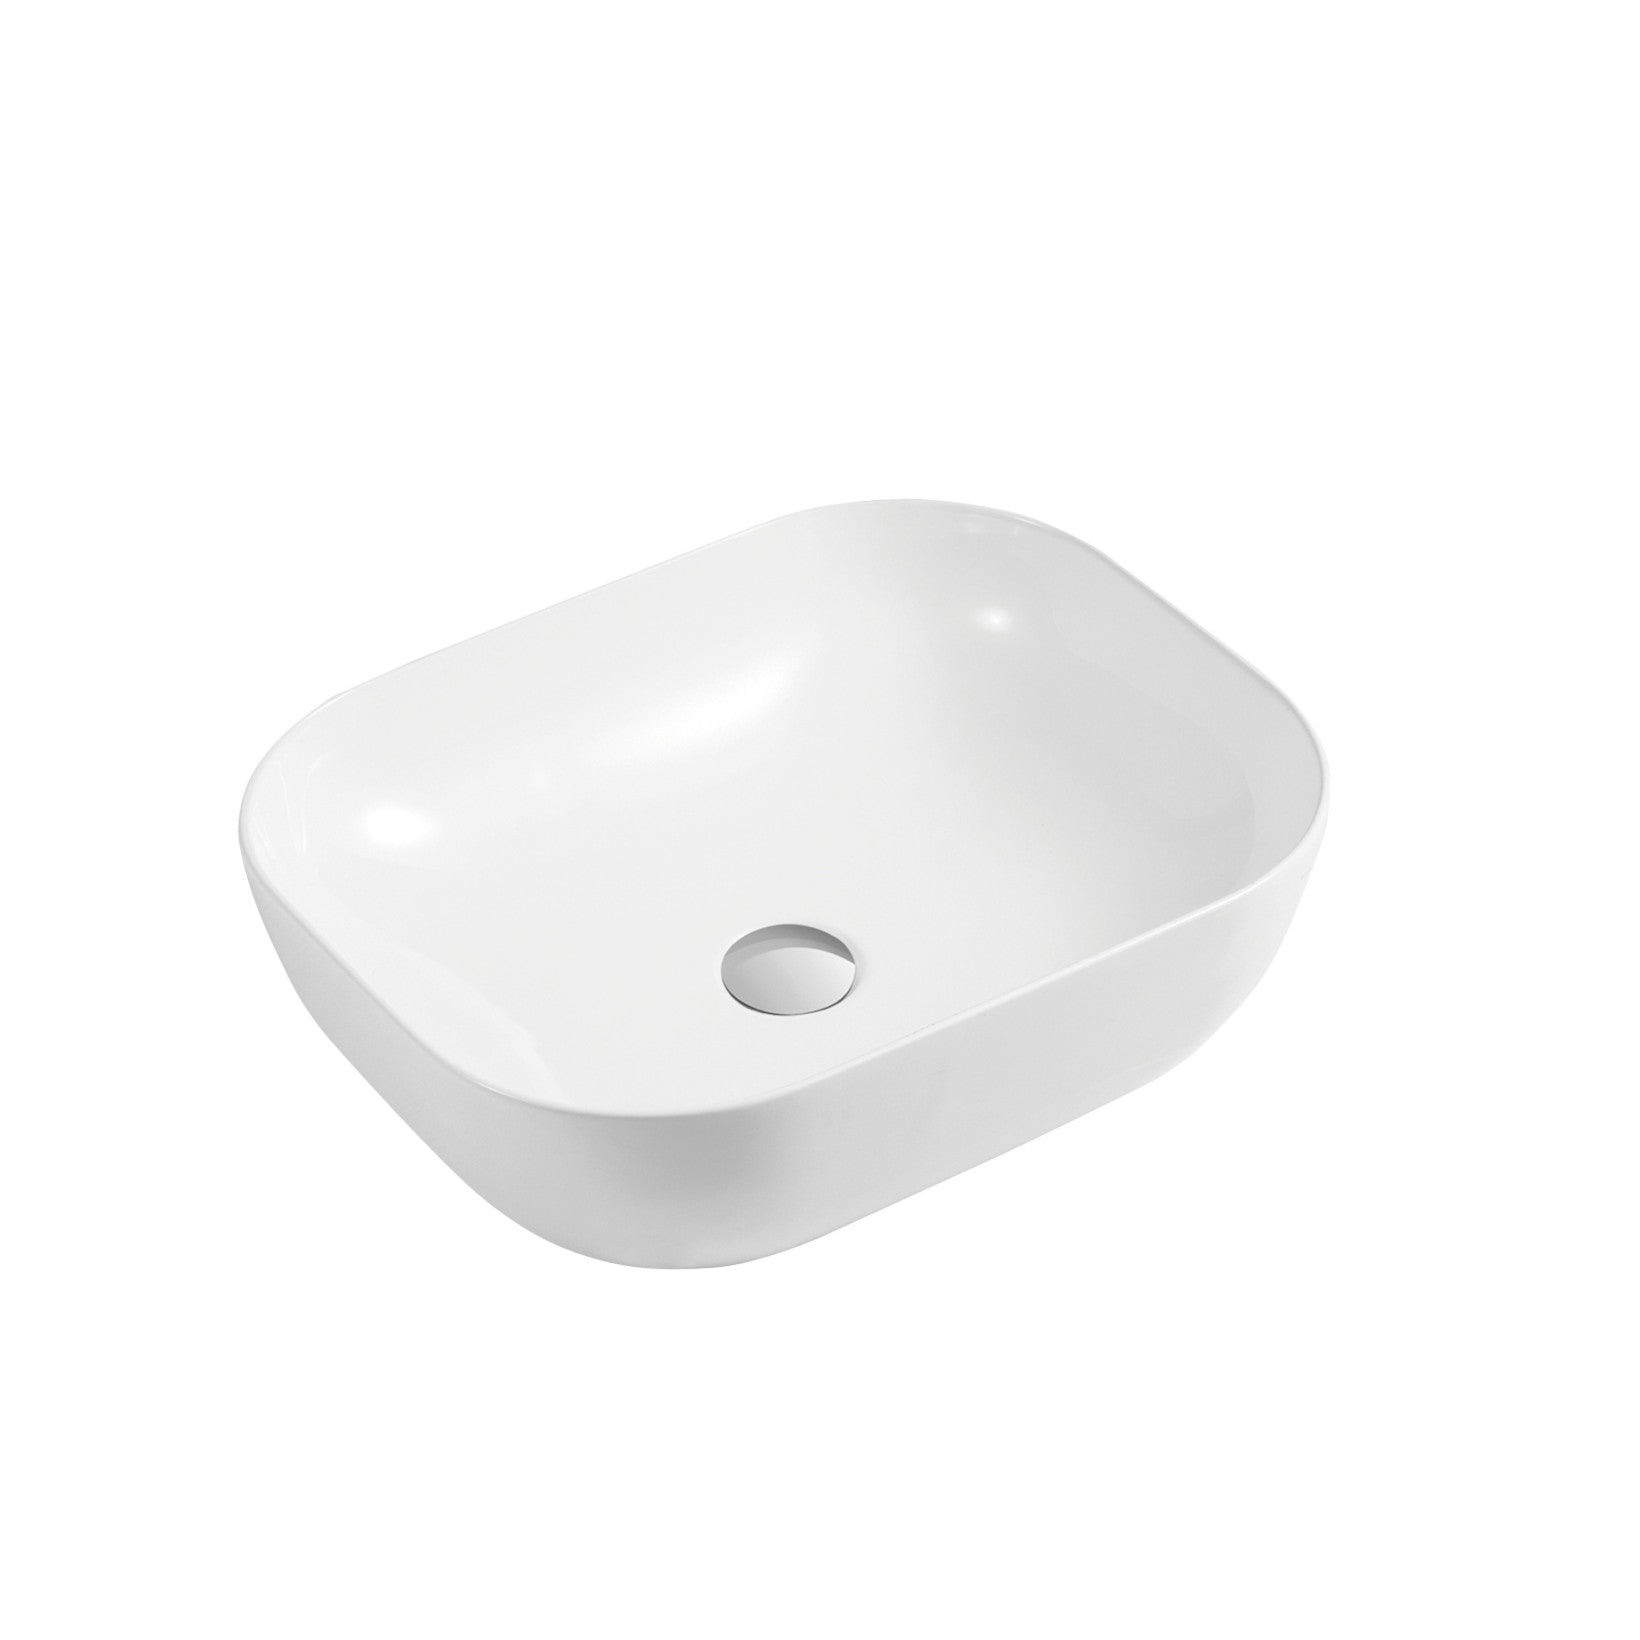 BASIN PA4637: Stylish and Durable Bathroom Basin For Modern Spaces